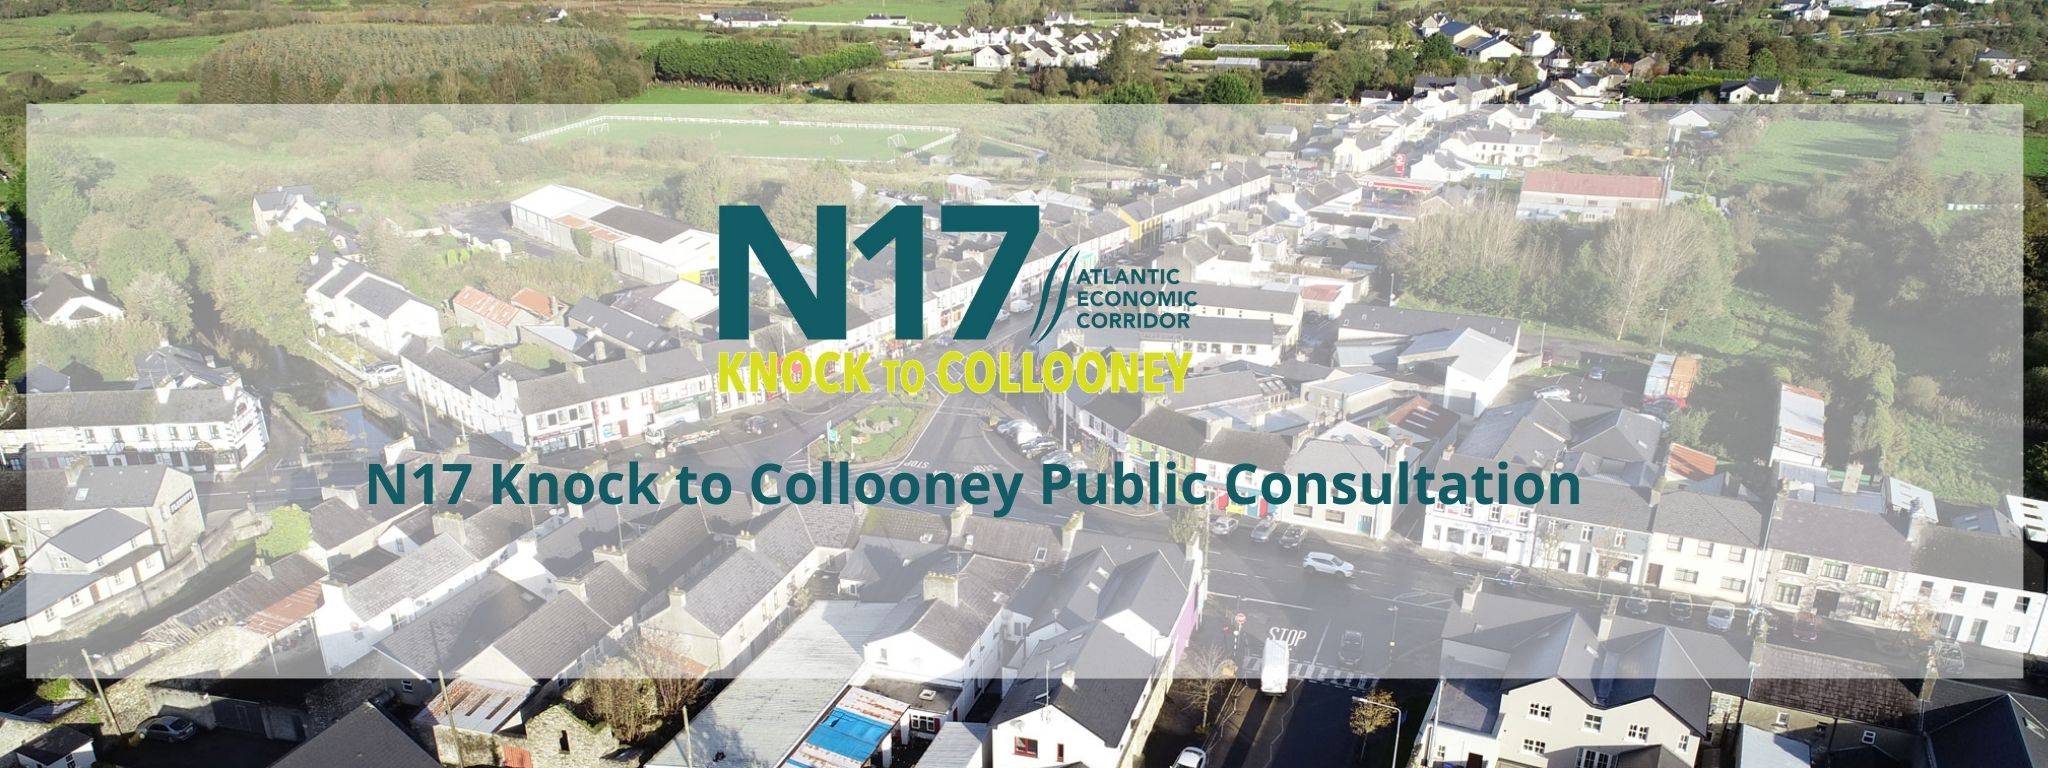 N17 Knock to Collooney Public Consultation